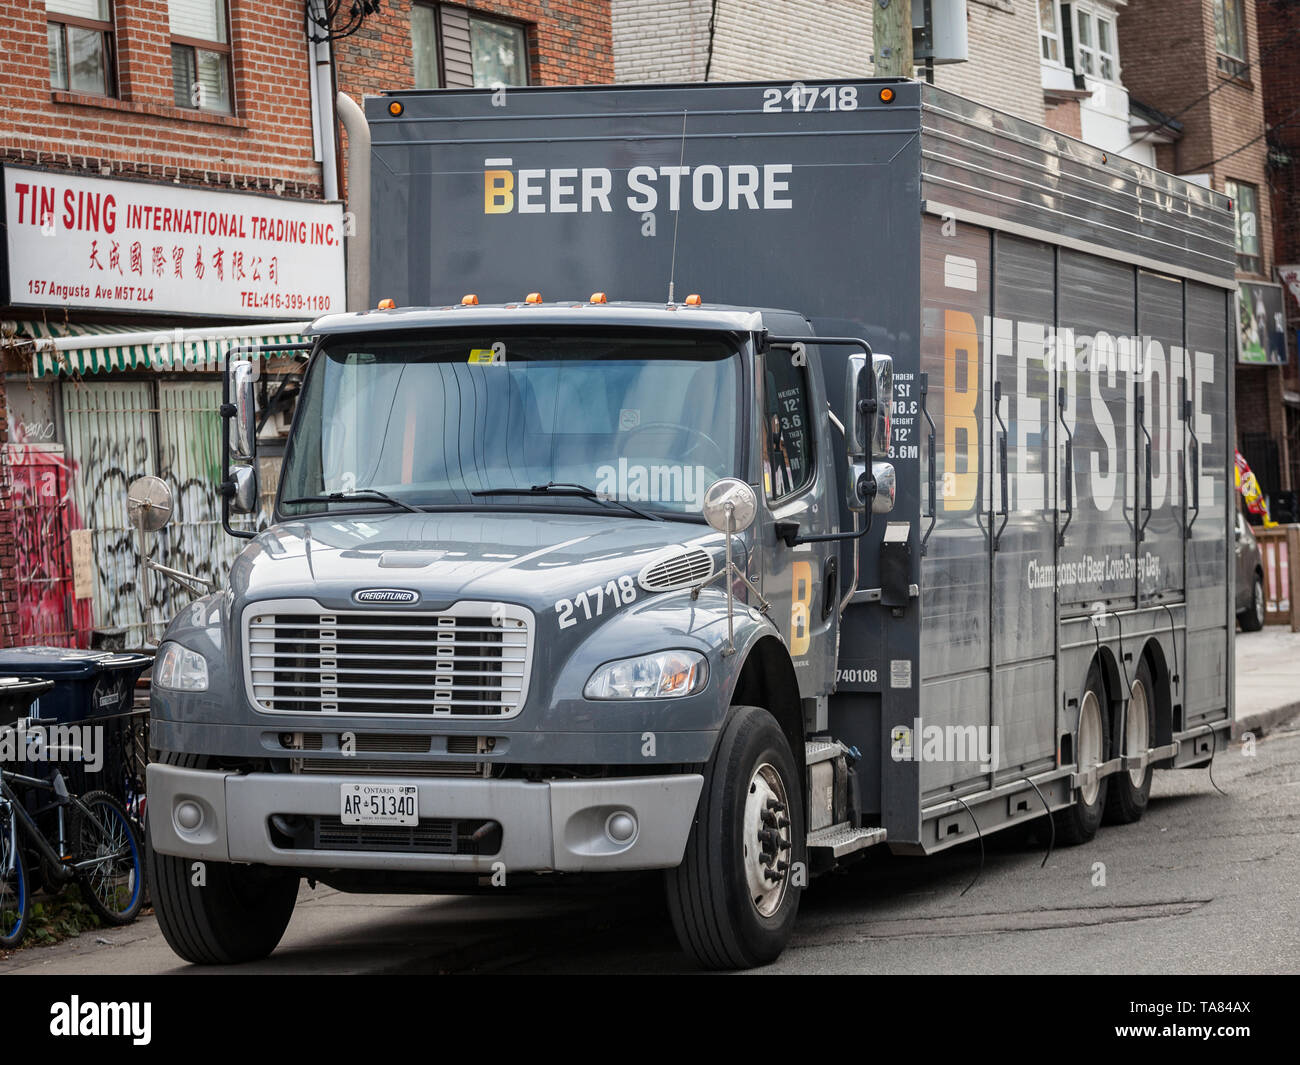 TORONTO, CANADA - NOVEMBER 13, 2018: Beer store logo on one of their delivery trucks in downtown Toronto, ONtario. Beer store is a chain of alcohol re Stock Photo